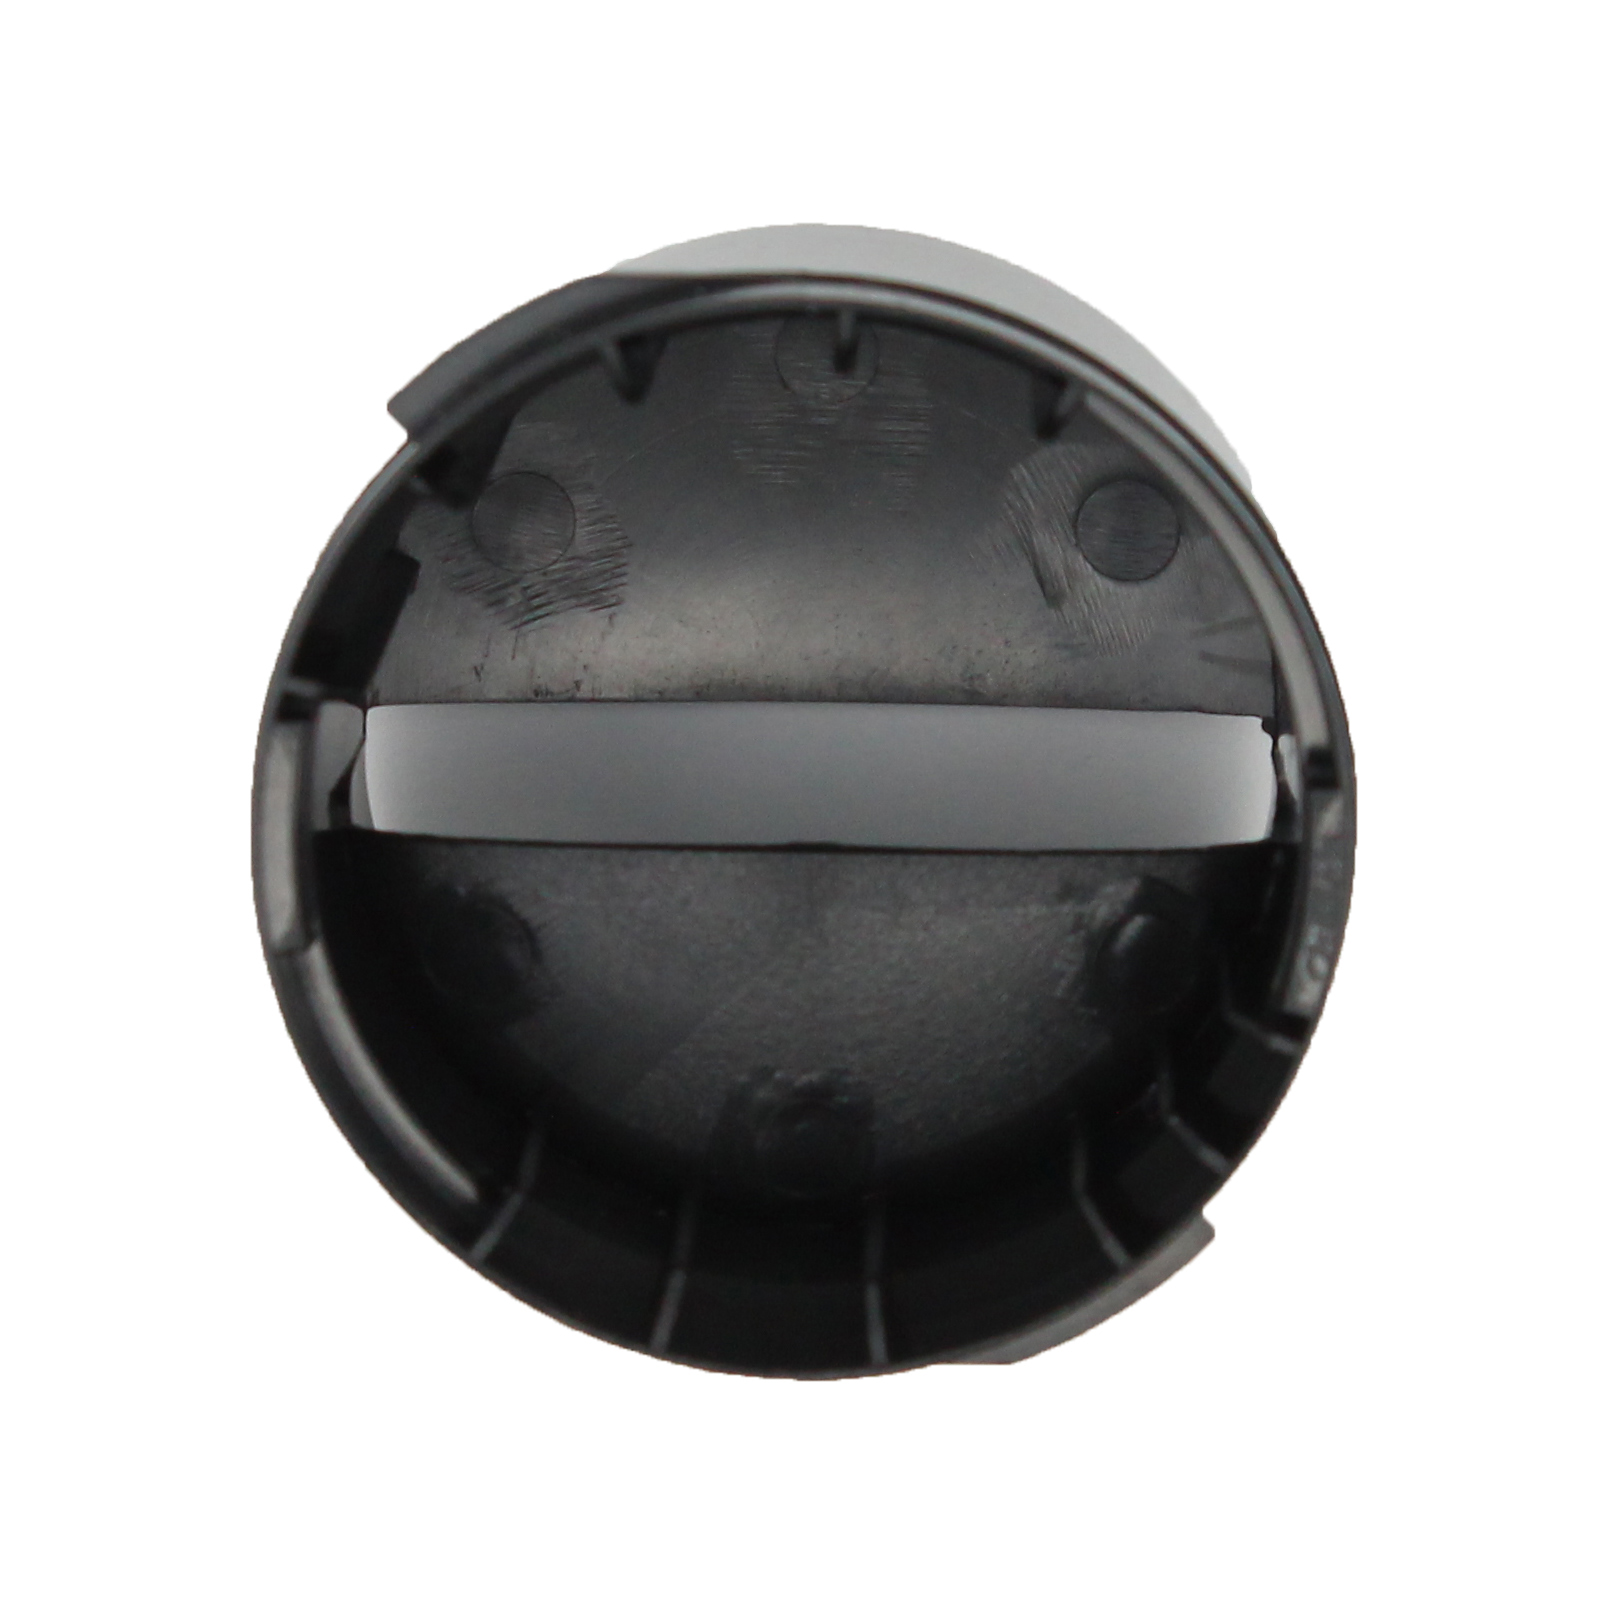 2260502B Refrigerator Water Filter Cap Replacement for Kenmore / Sears 10656533400 Refrigerator - Compatible with WP2260518B Black Water Filter Cap - UpStart Components Brand - image 2 of 4